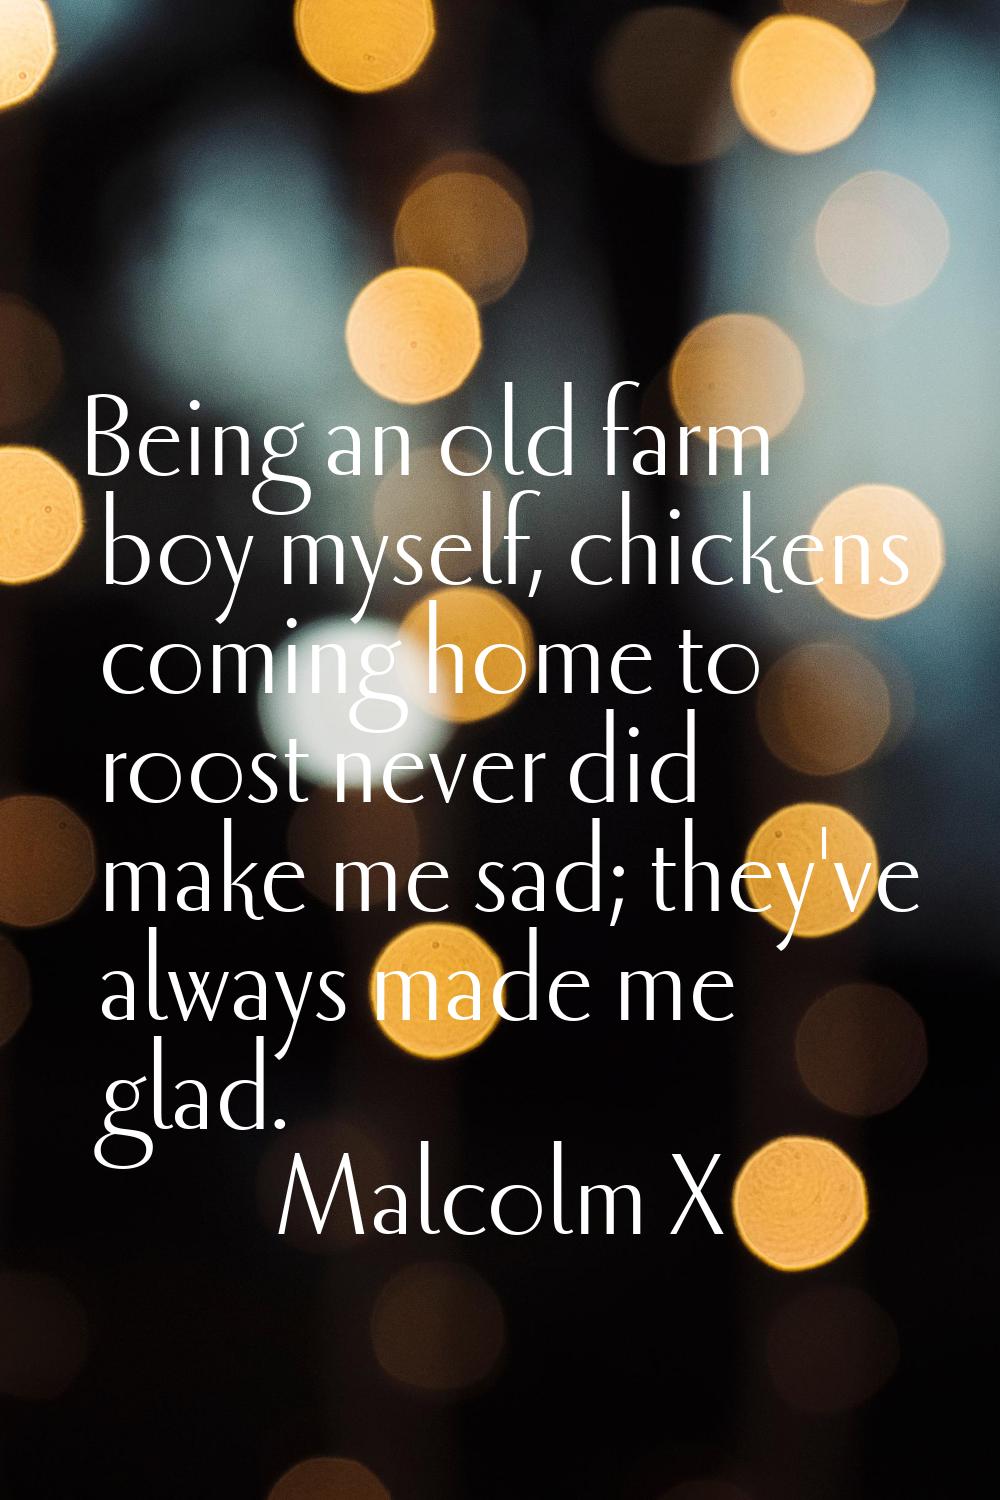 Being an old farm boy myself, chickens coming home to roost never did make me sad; they've always m